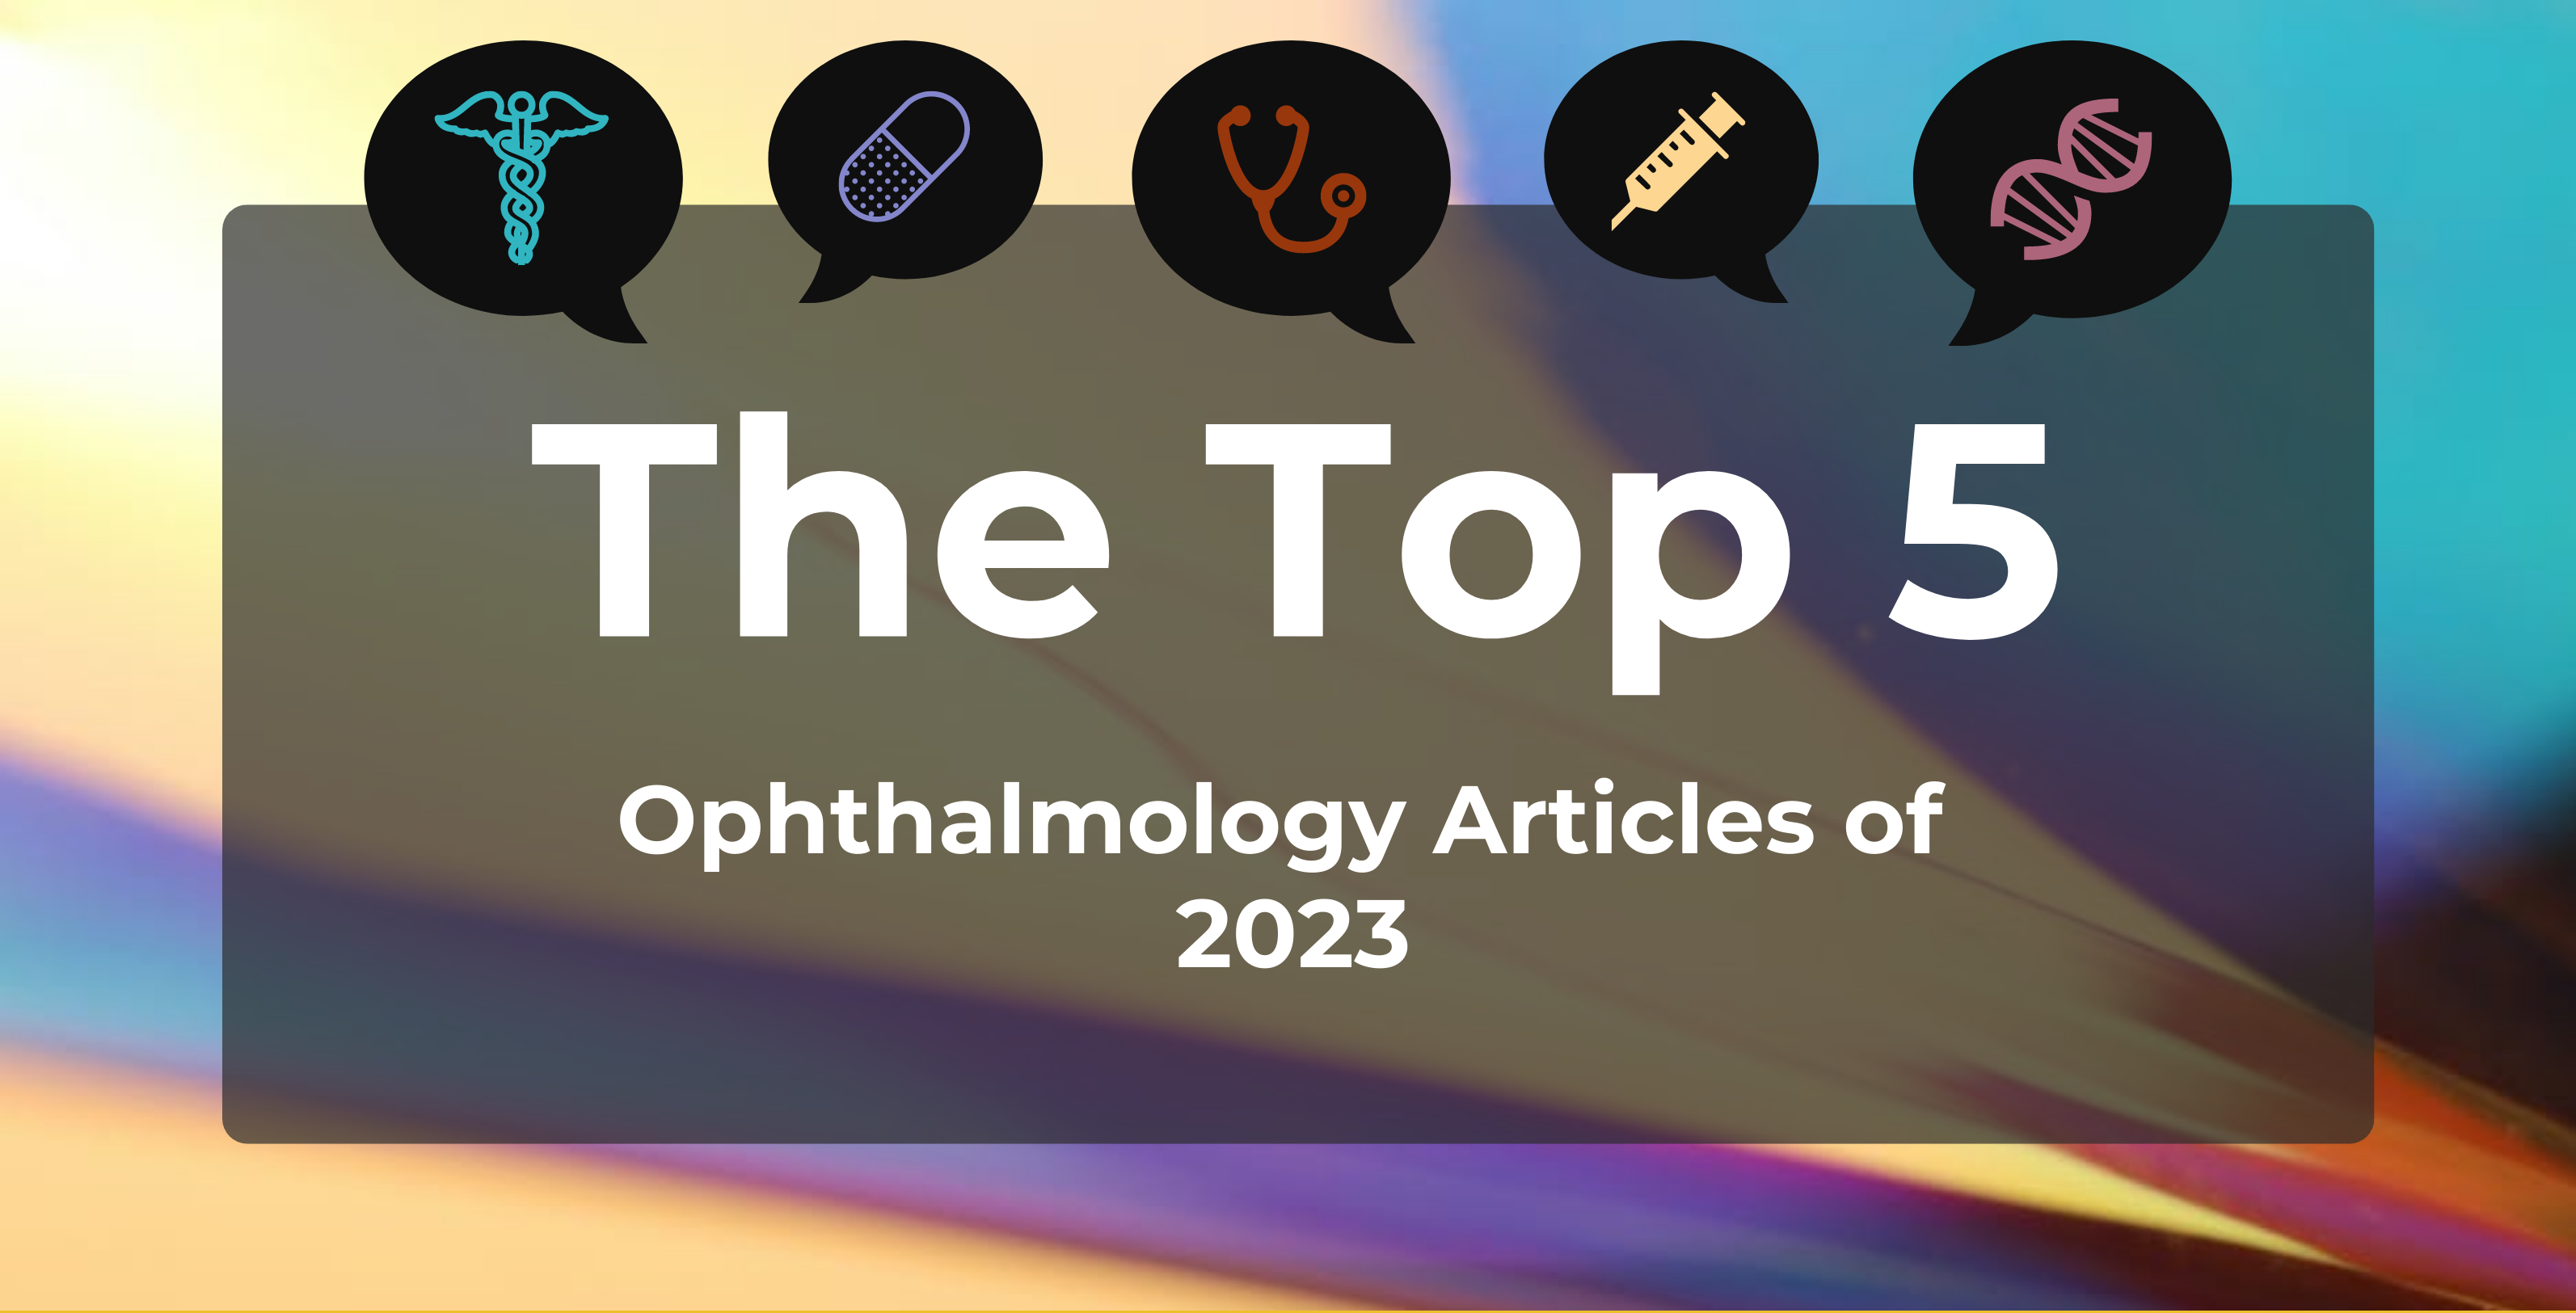 The Top 5 Ophthalmology Articles of 2023